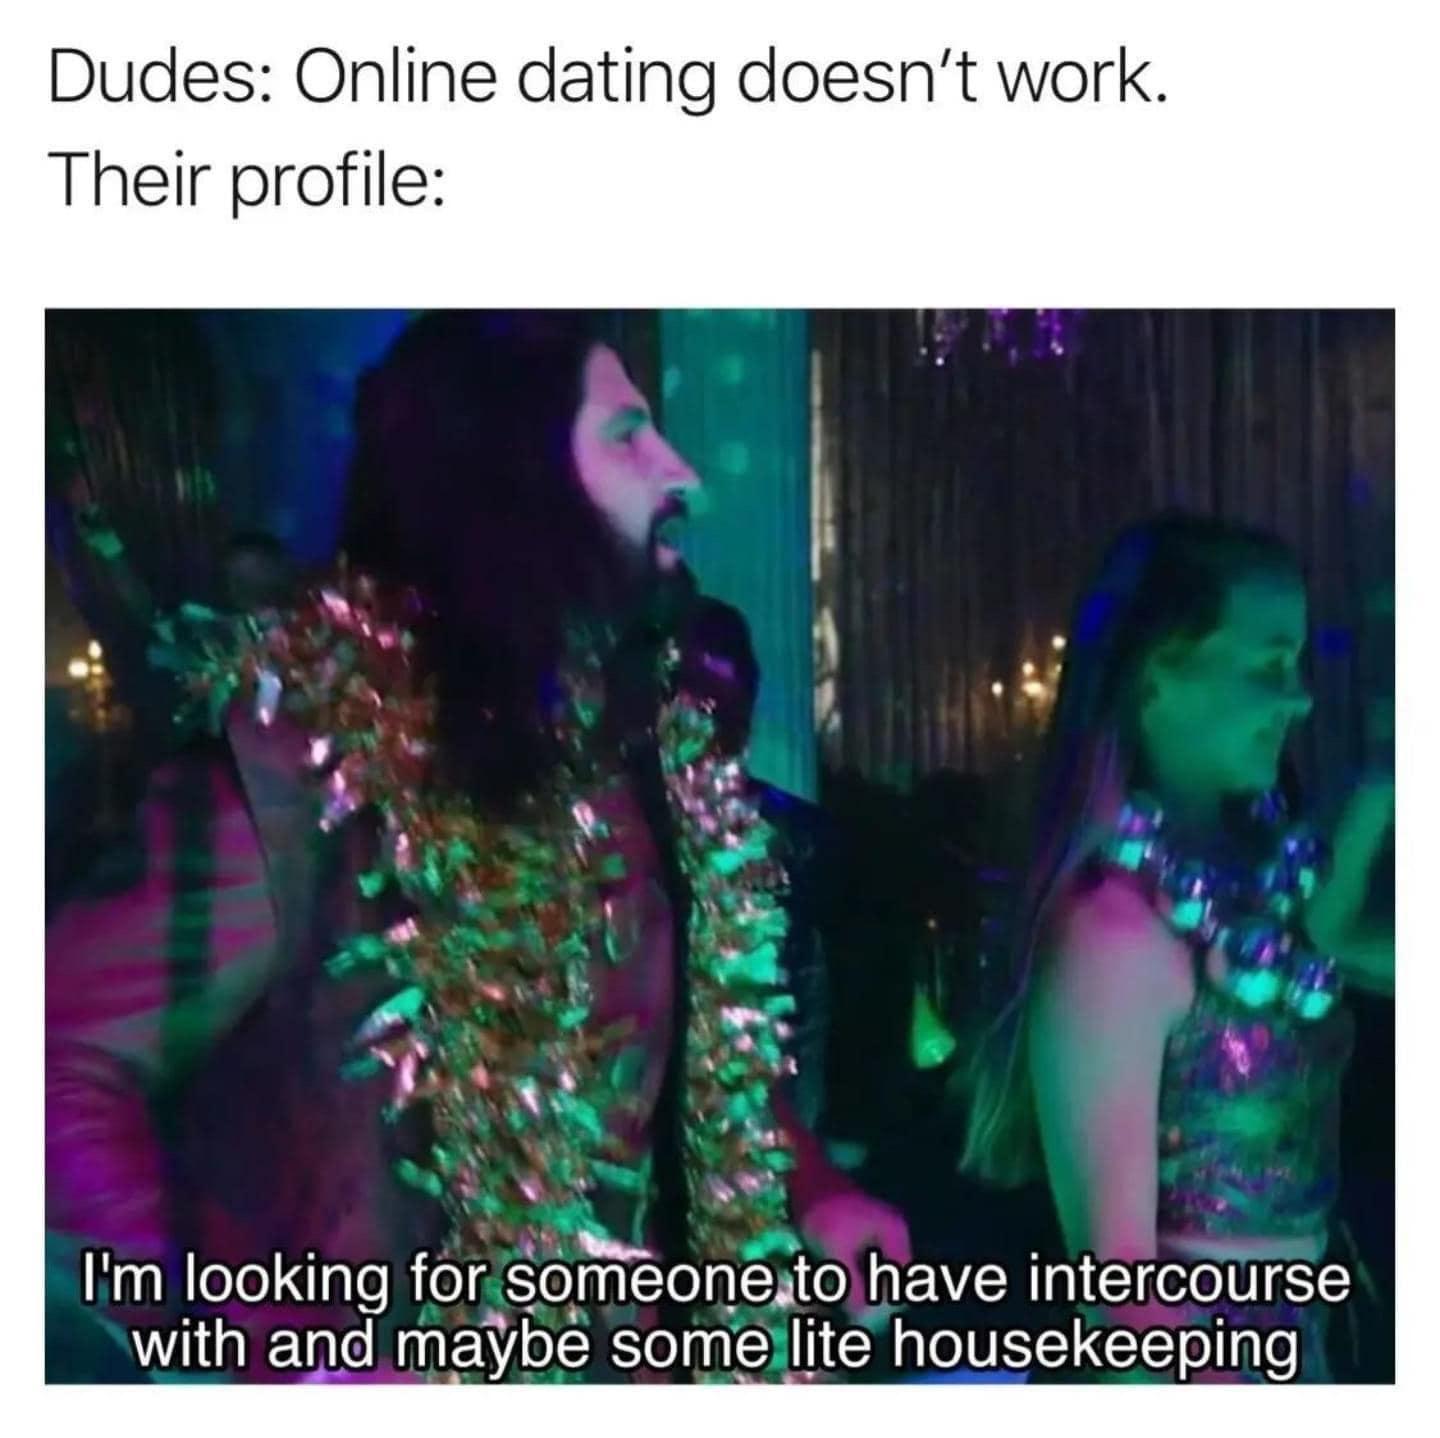 fresh memes - fun - Dudes Online dating doesn't work. Their profile I'm looking for someone to have intercourse with and maybe some lite housekeeping